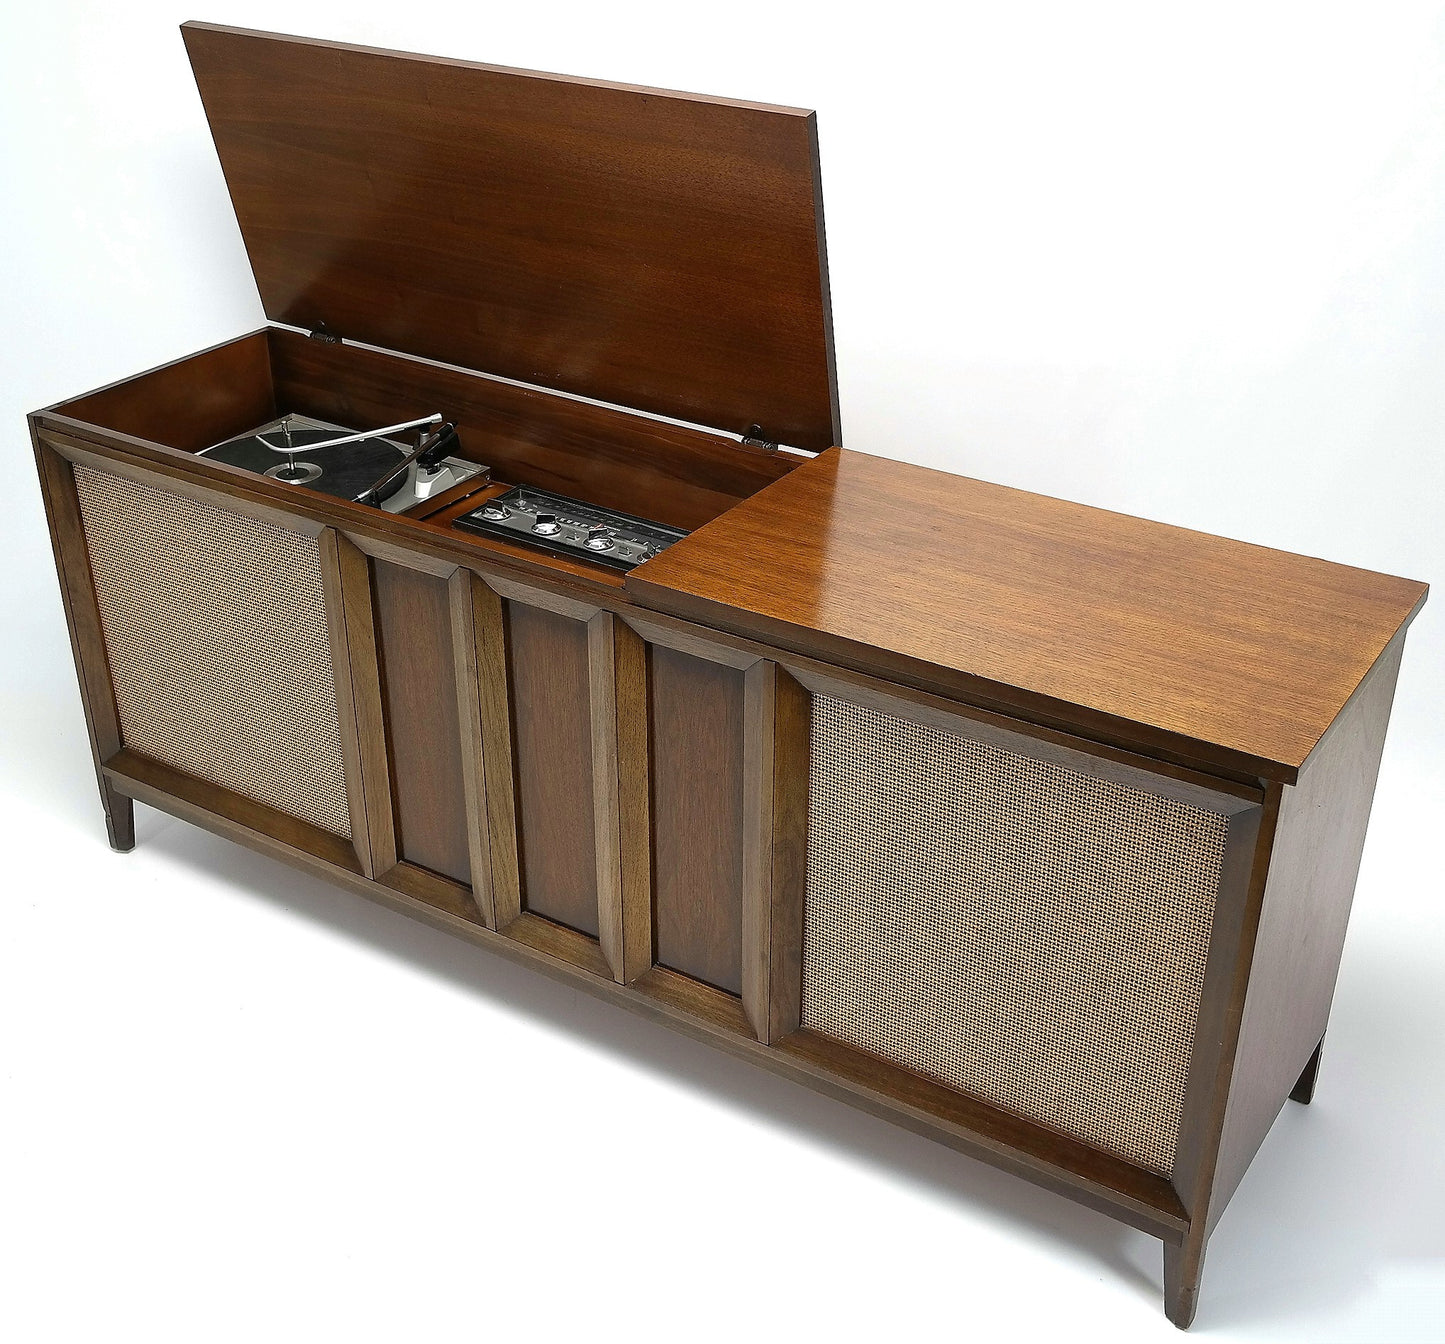 LONG AND LOW MCM STEREO - 50's - Mid Century Philco Stereo Console Record Player - AM / FM Tuner The Vintedge Co.